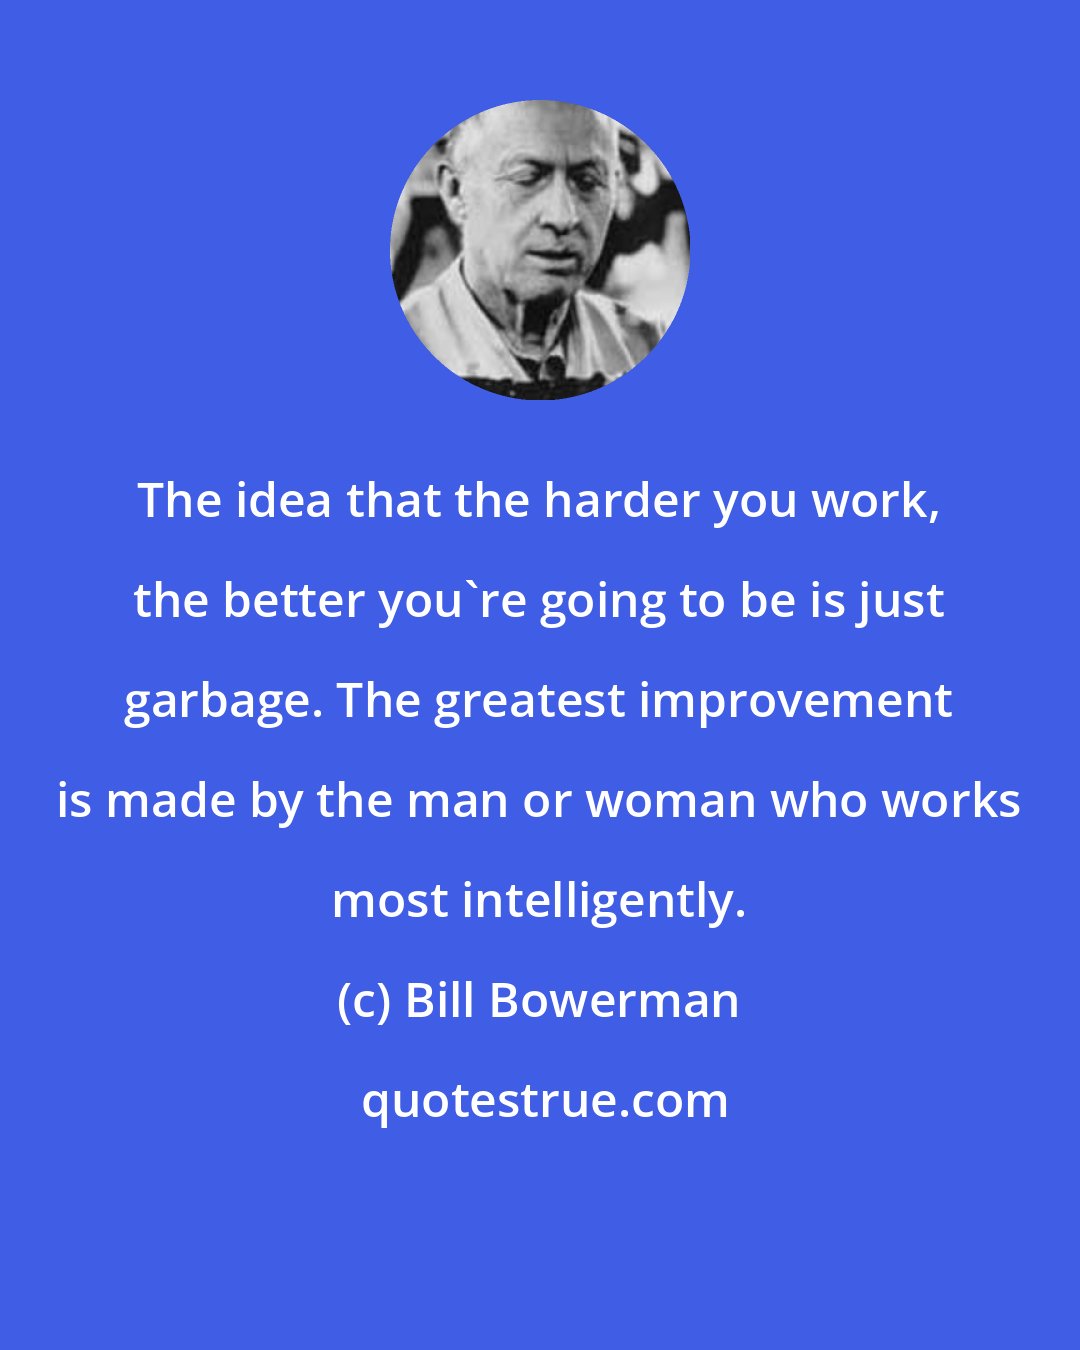 Bill Bowerman: The idea that the harder you work, the better you're going to be is just garbage. The greatest improvement is made by the man or woman who works most intelligently.